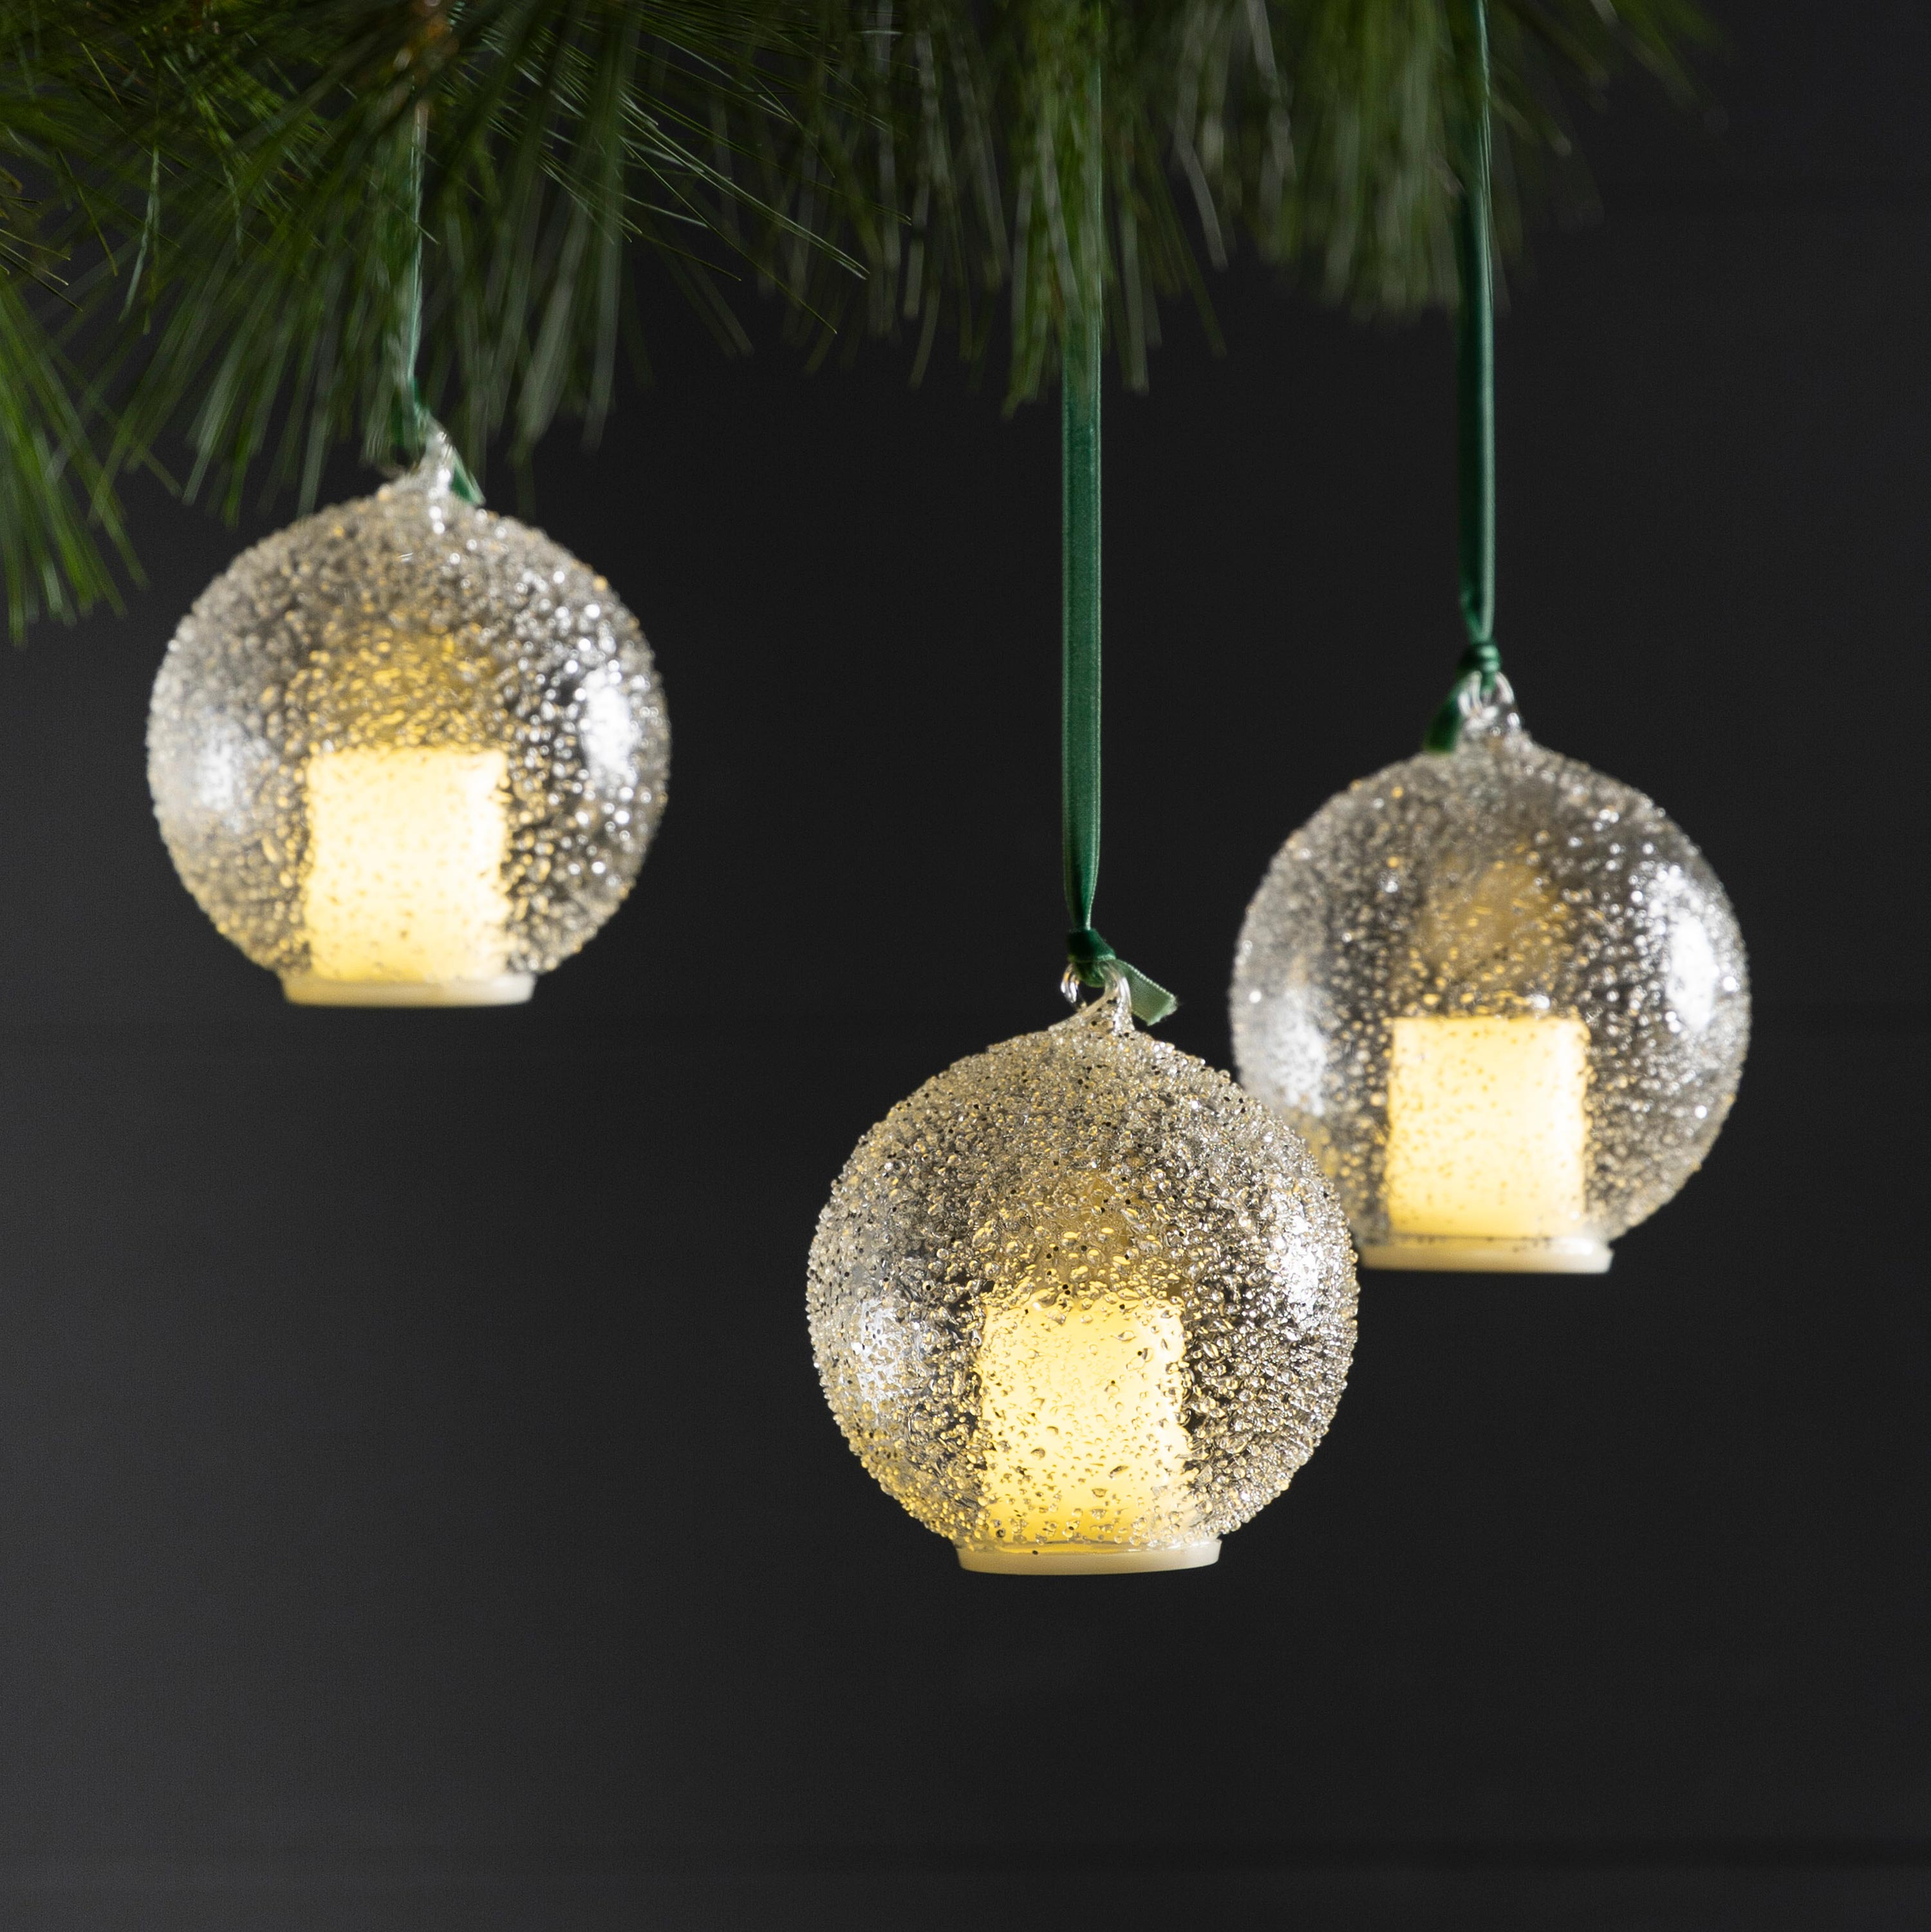 LED Candle and Glass Ornaments, Set of 3